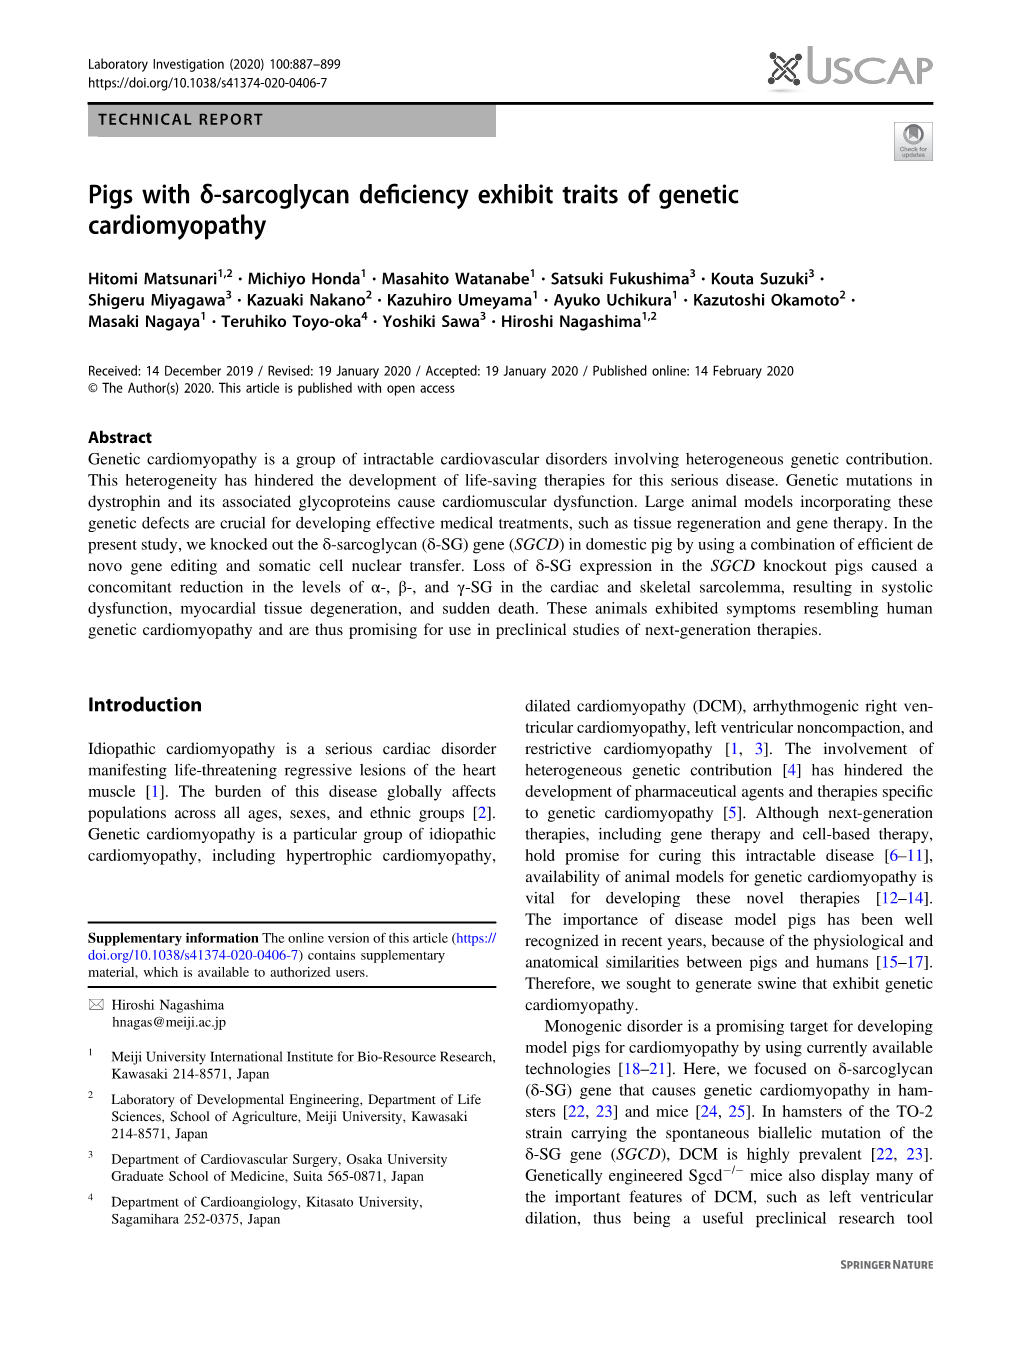 Pigs with Î´-Sarcoglycan Deficiency Exhibit Traits of Genetic